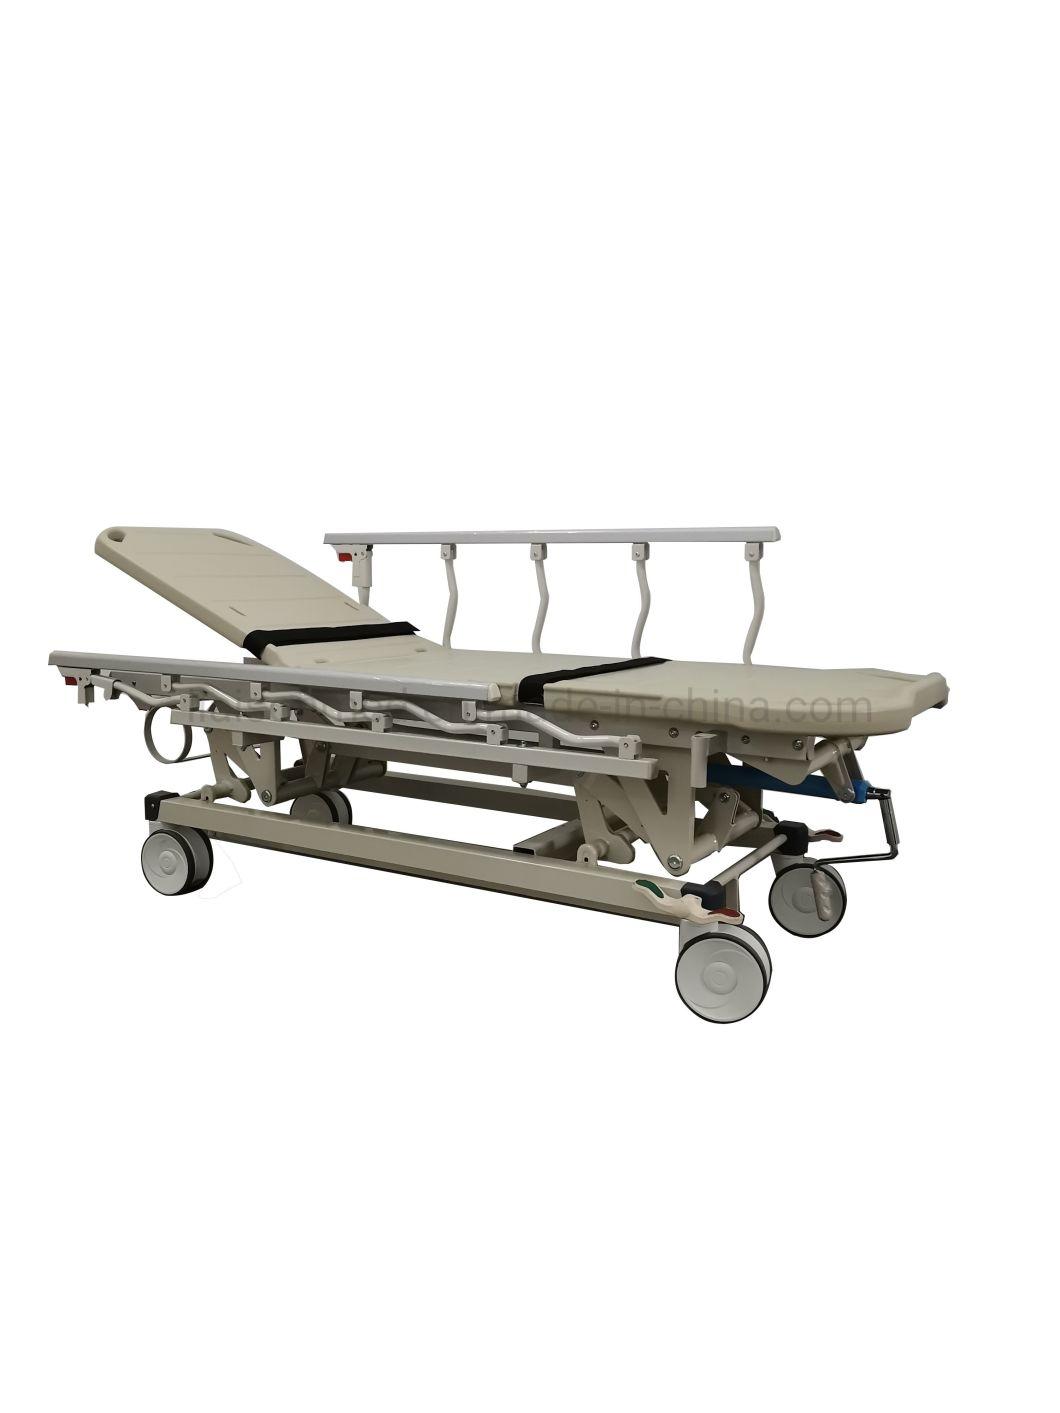 Unfolded SGS Liaison Wooden Package 1930mm*663mm*510— 850mm Ambulance Medical Stretcher